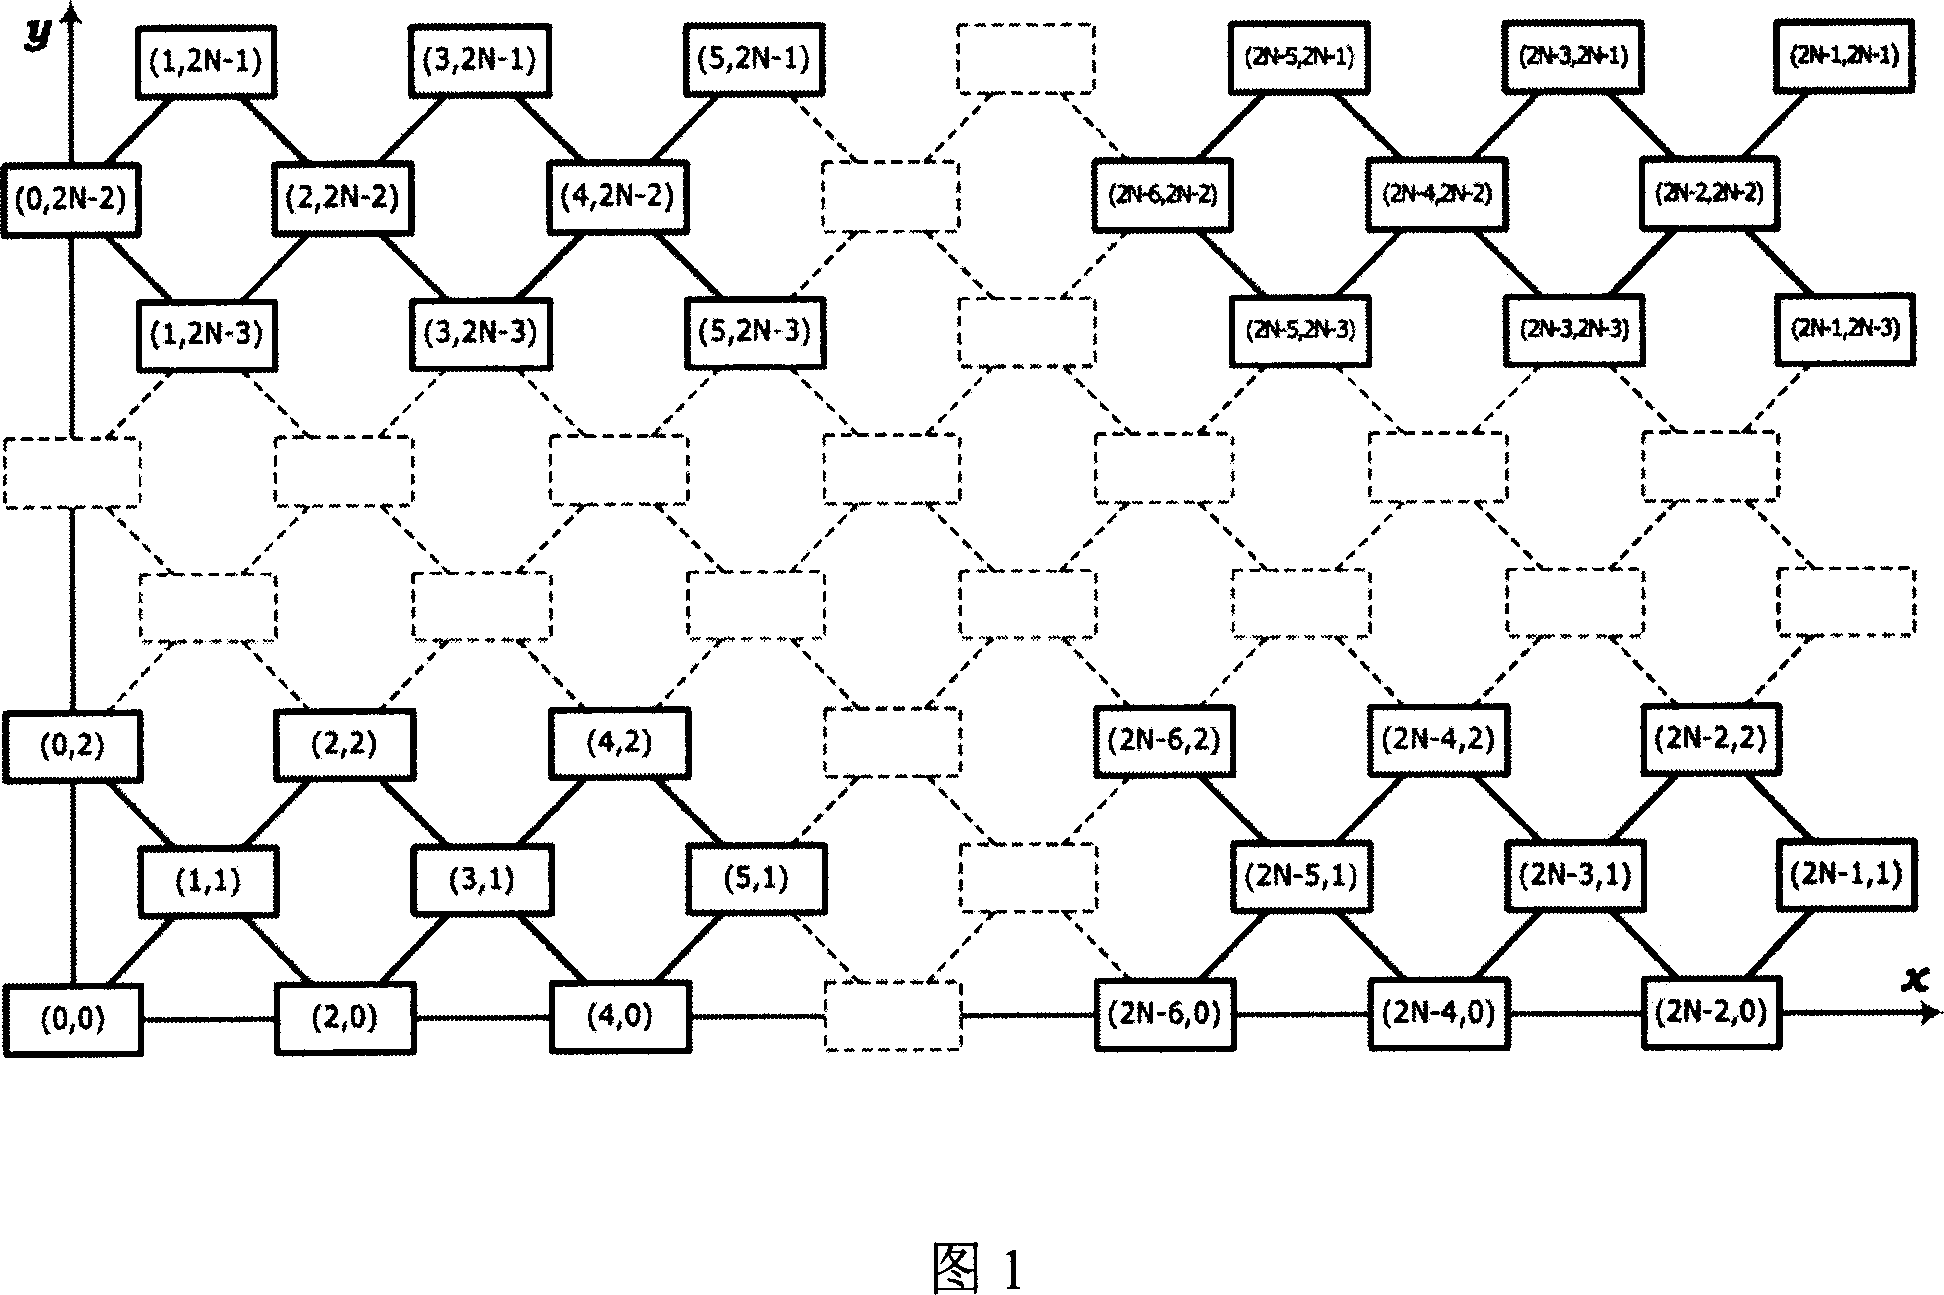 Inside and outside connecting network topology framework and parallel computing system for self-consistent expanding the same